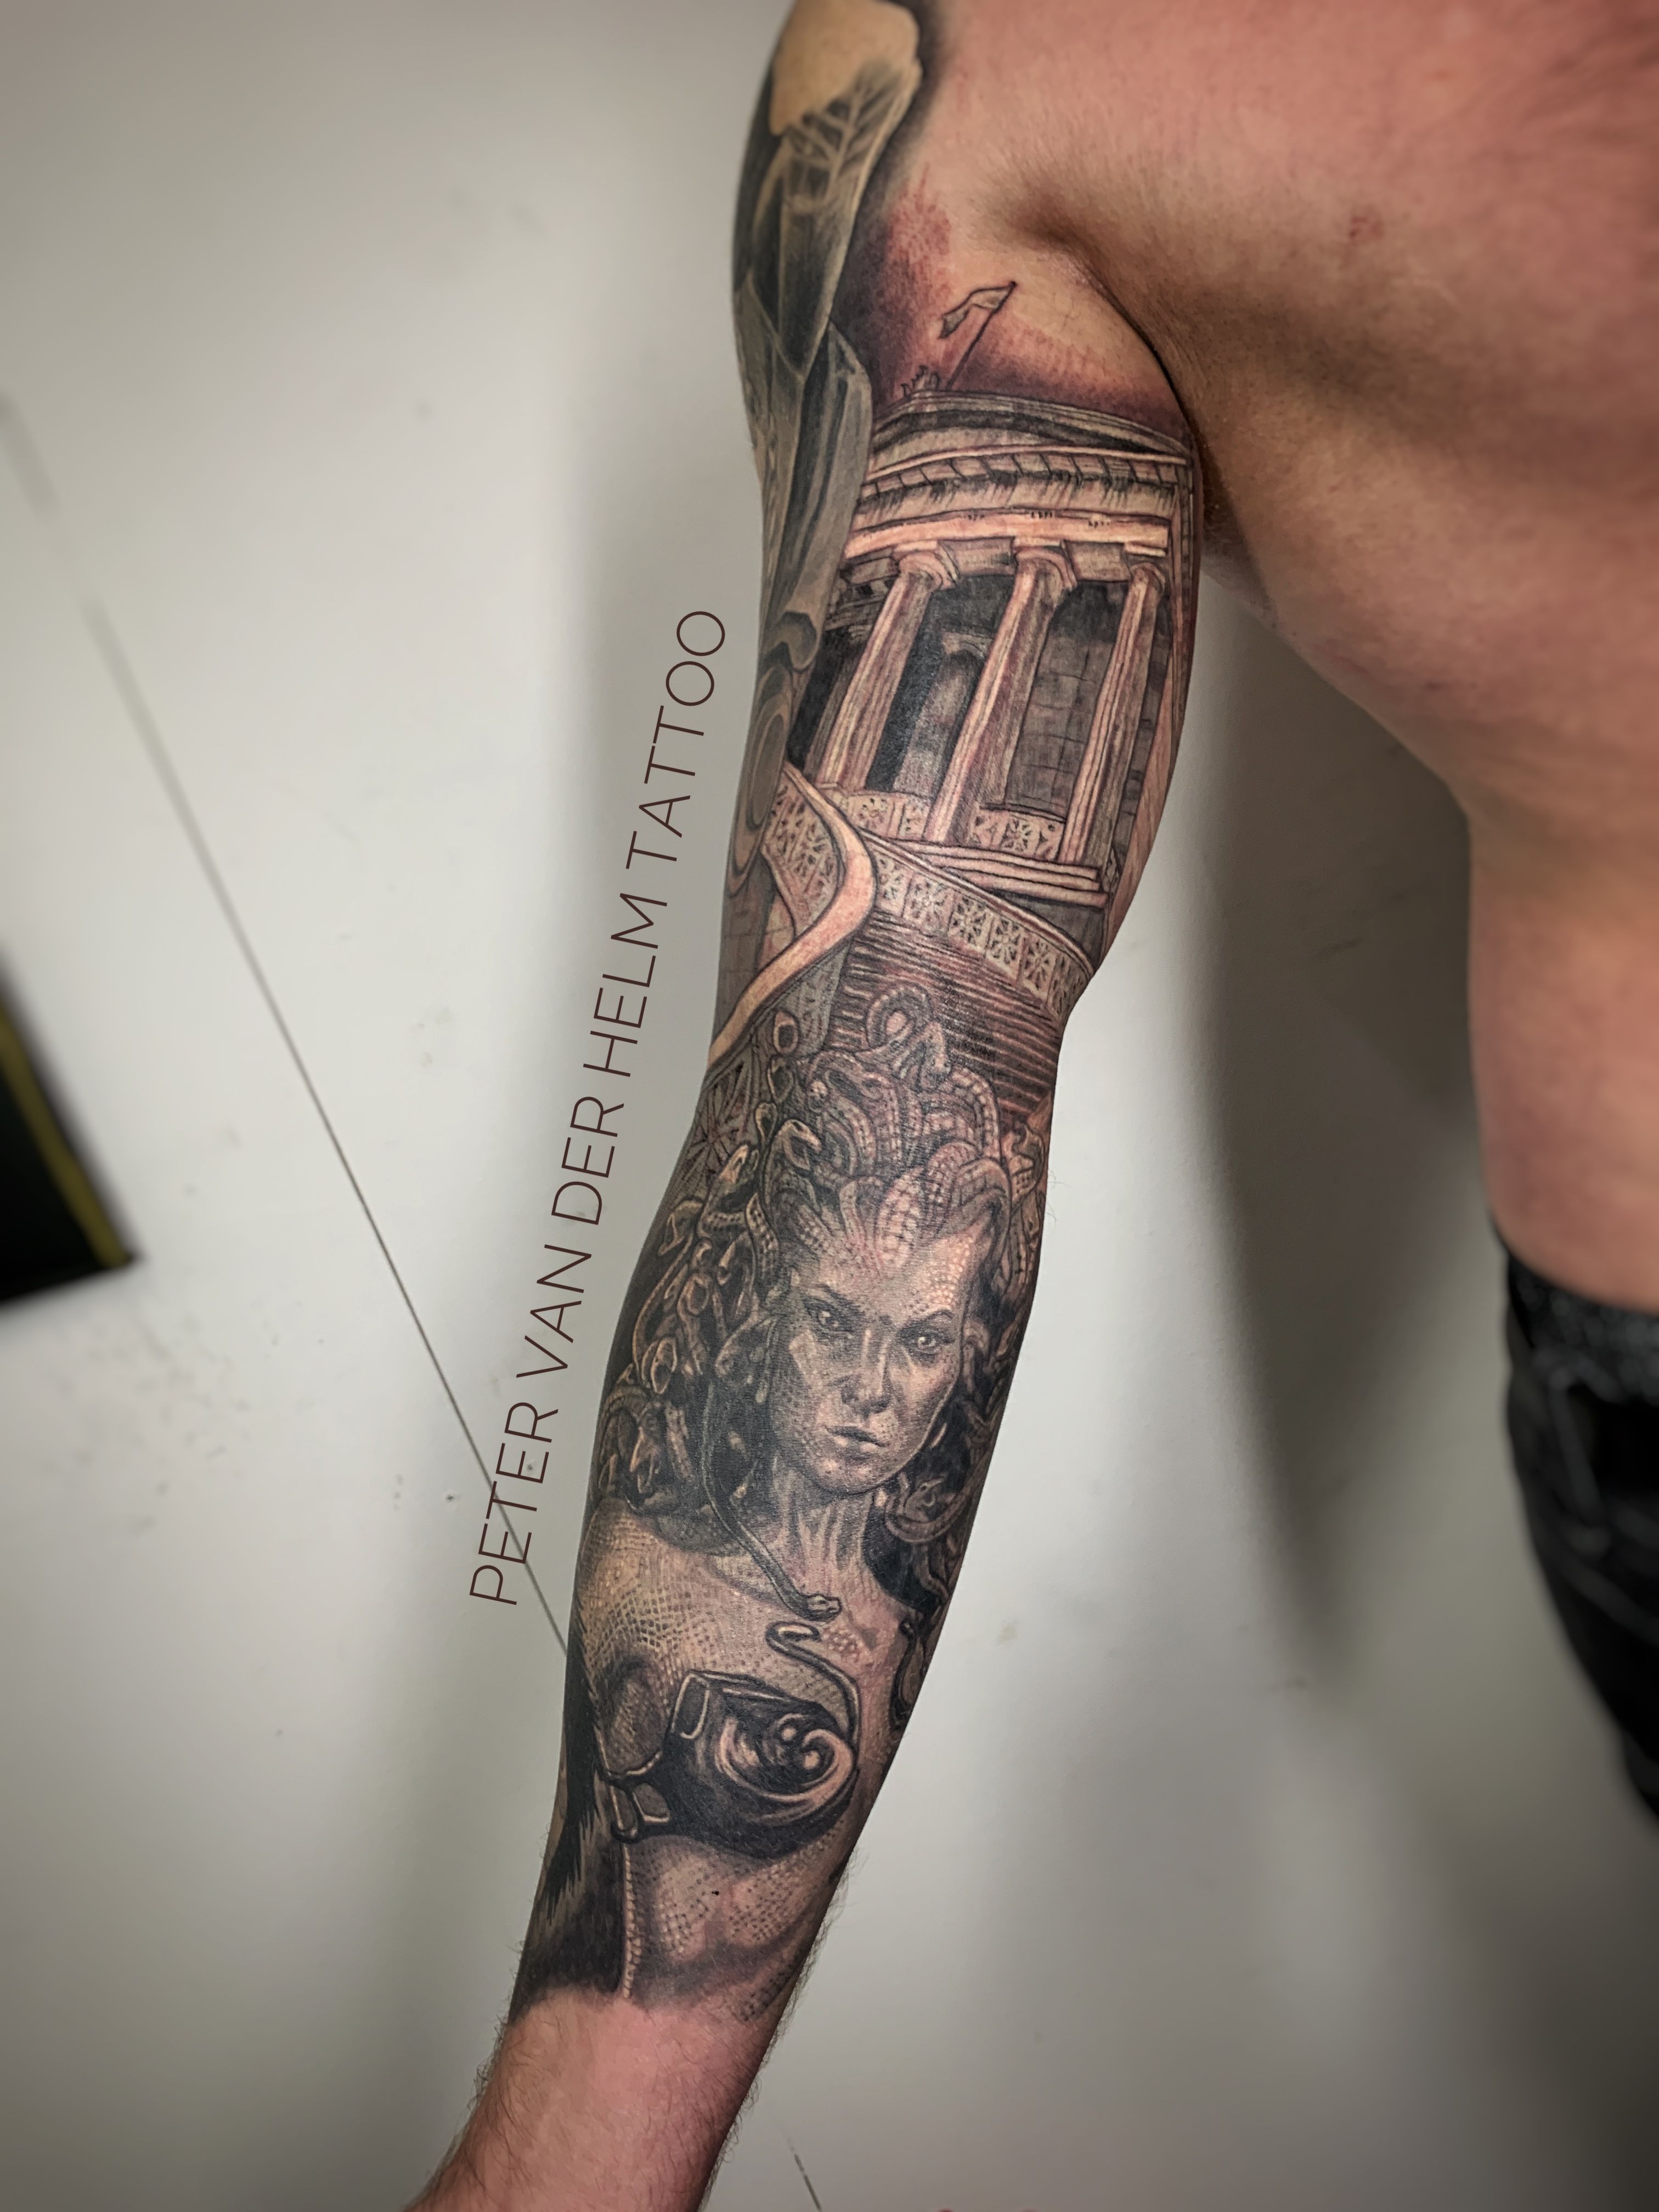 Tattoo uploaded by Peter van der Helm • Full sleeve with Medusa and Greek library. • Tattoodo